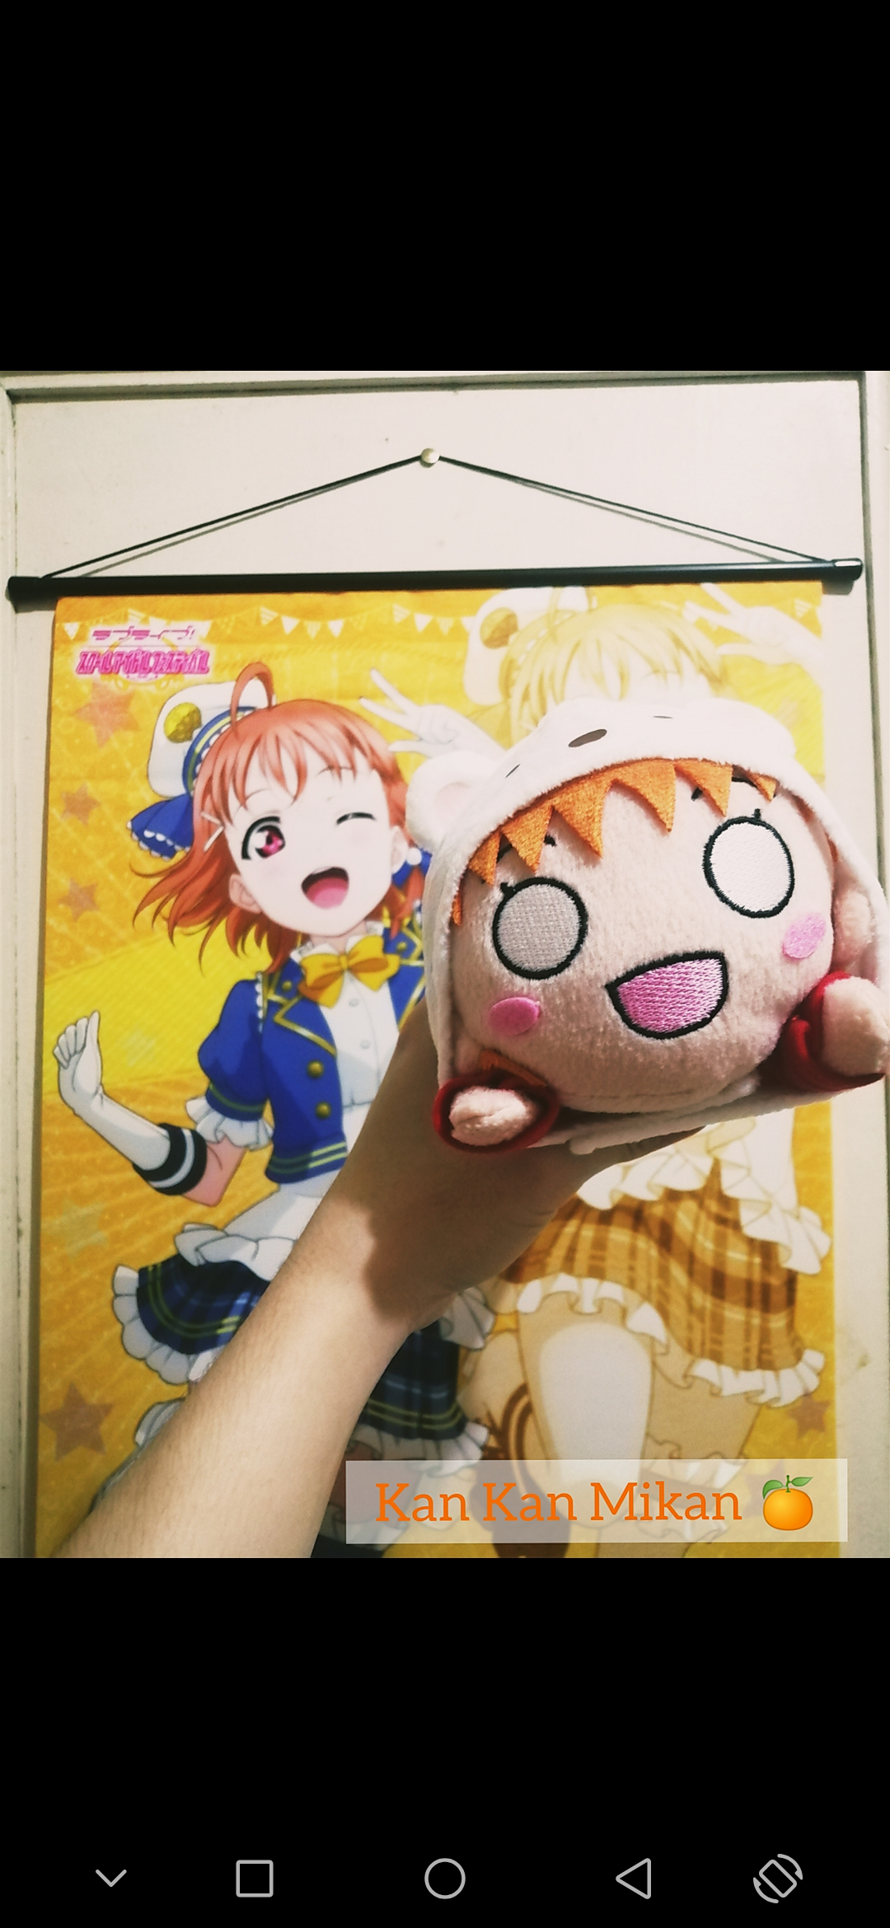 HAPPY BIRTHDAY CHIKA CHAN!!! 🧡🍊 Sorry it's just a screenshot... I can't find this pic on my phone...